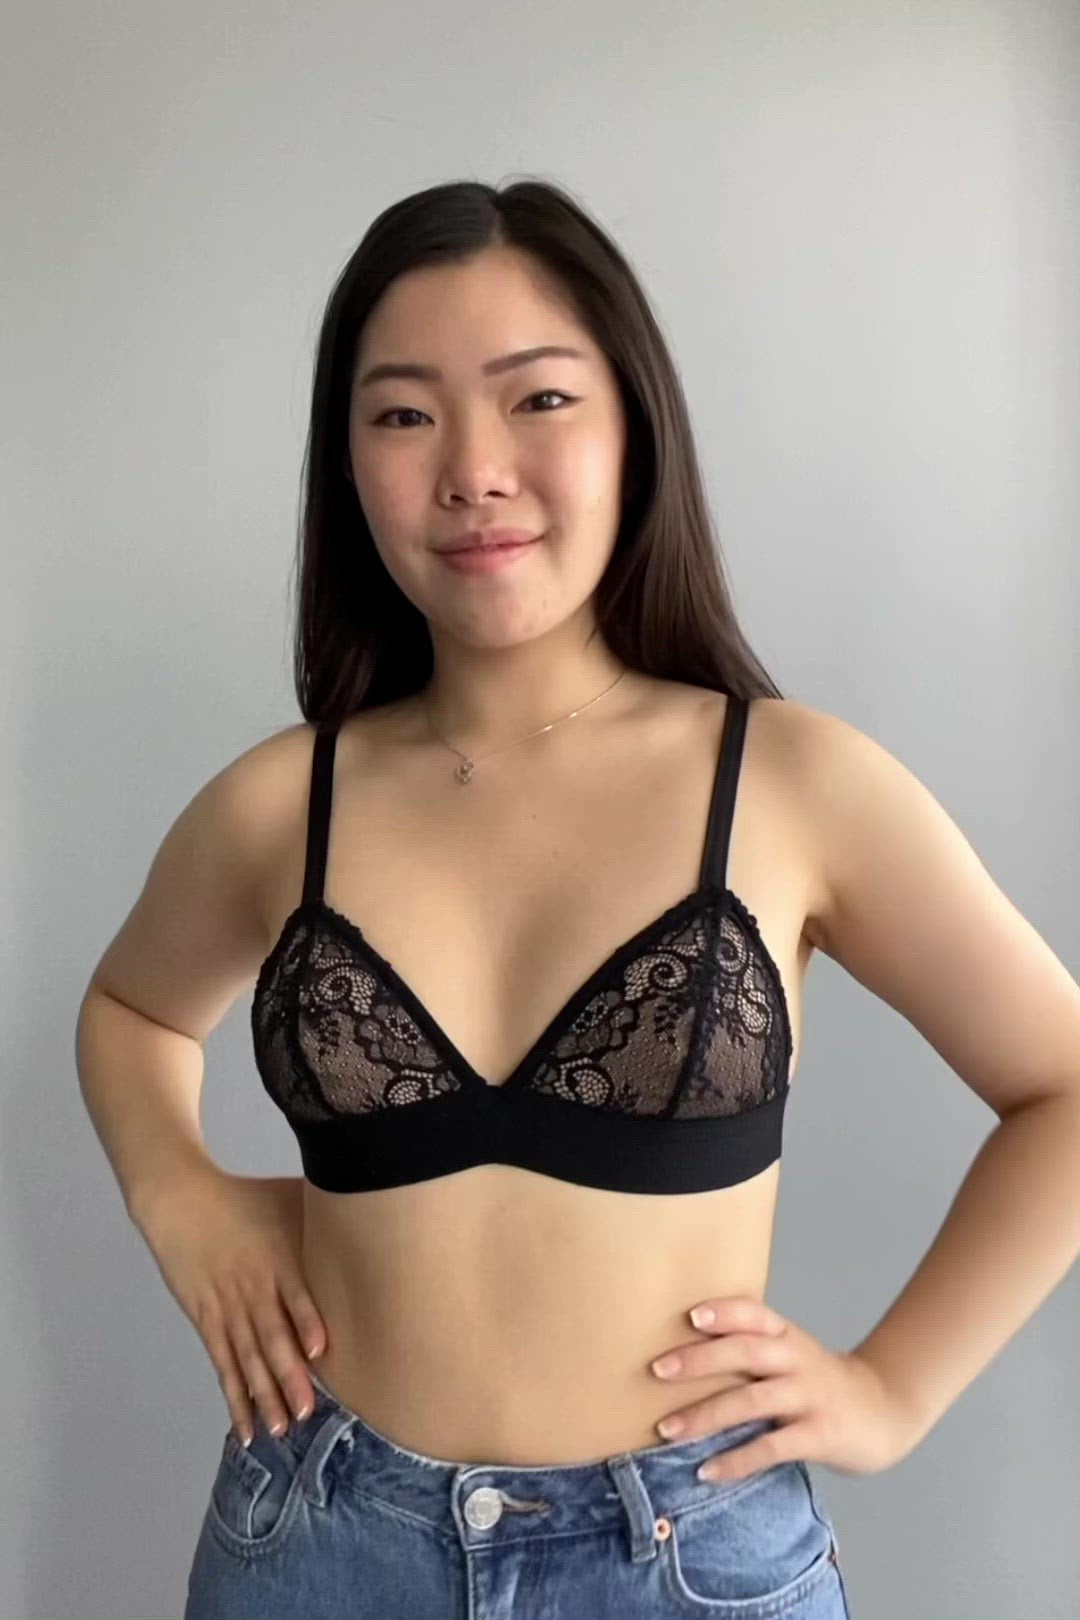 Video of Rubies Bras Client and Model wearing a black Pietite Laces bra